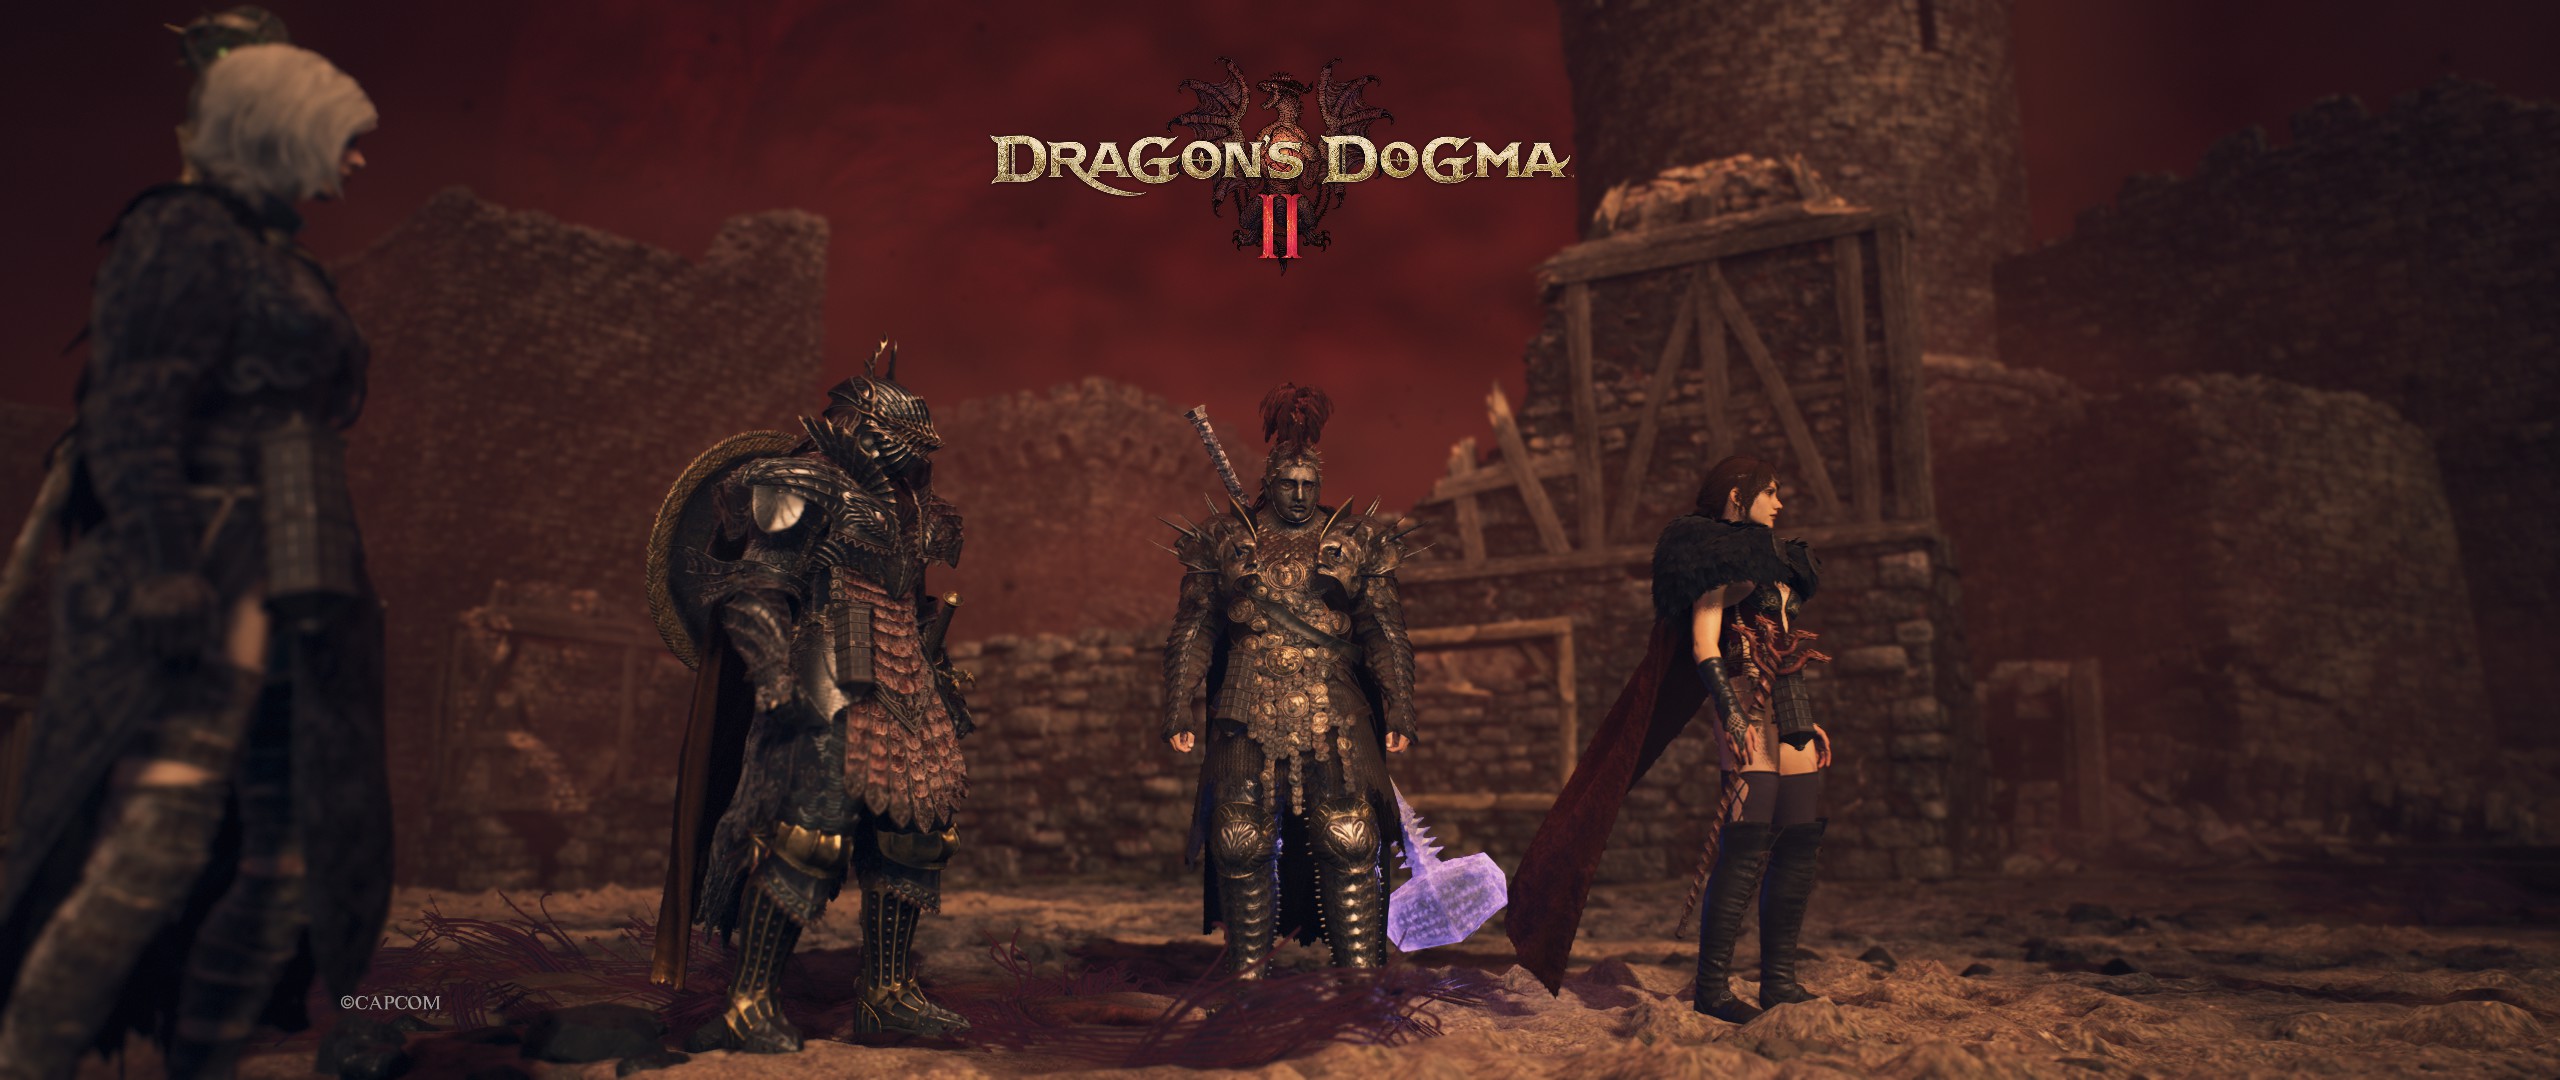 General 2560x1080 DD2 Game Games DD2 Dragon's Dogma 2 title video game characters CGI Dragon's Dogma standing video games armor video game art screen shot hammer watermarked video game men line-up video game girls cape Capcom